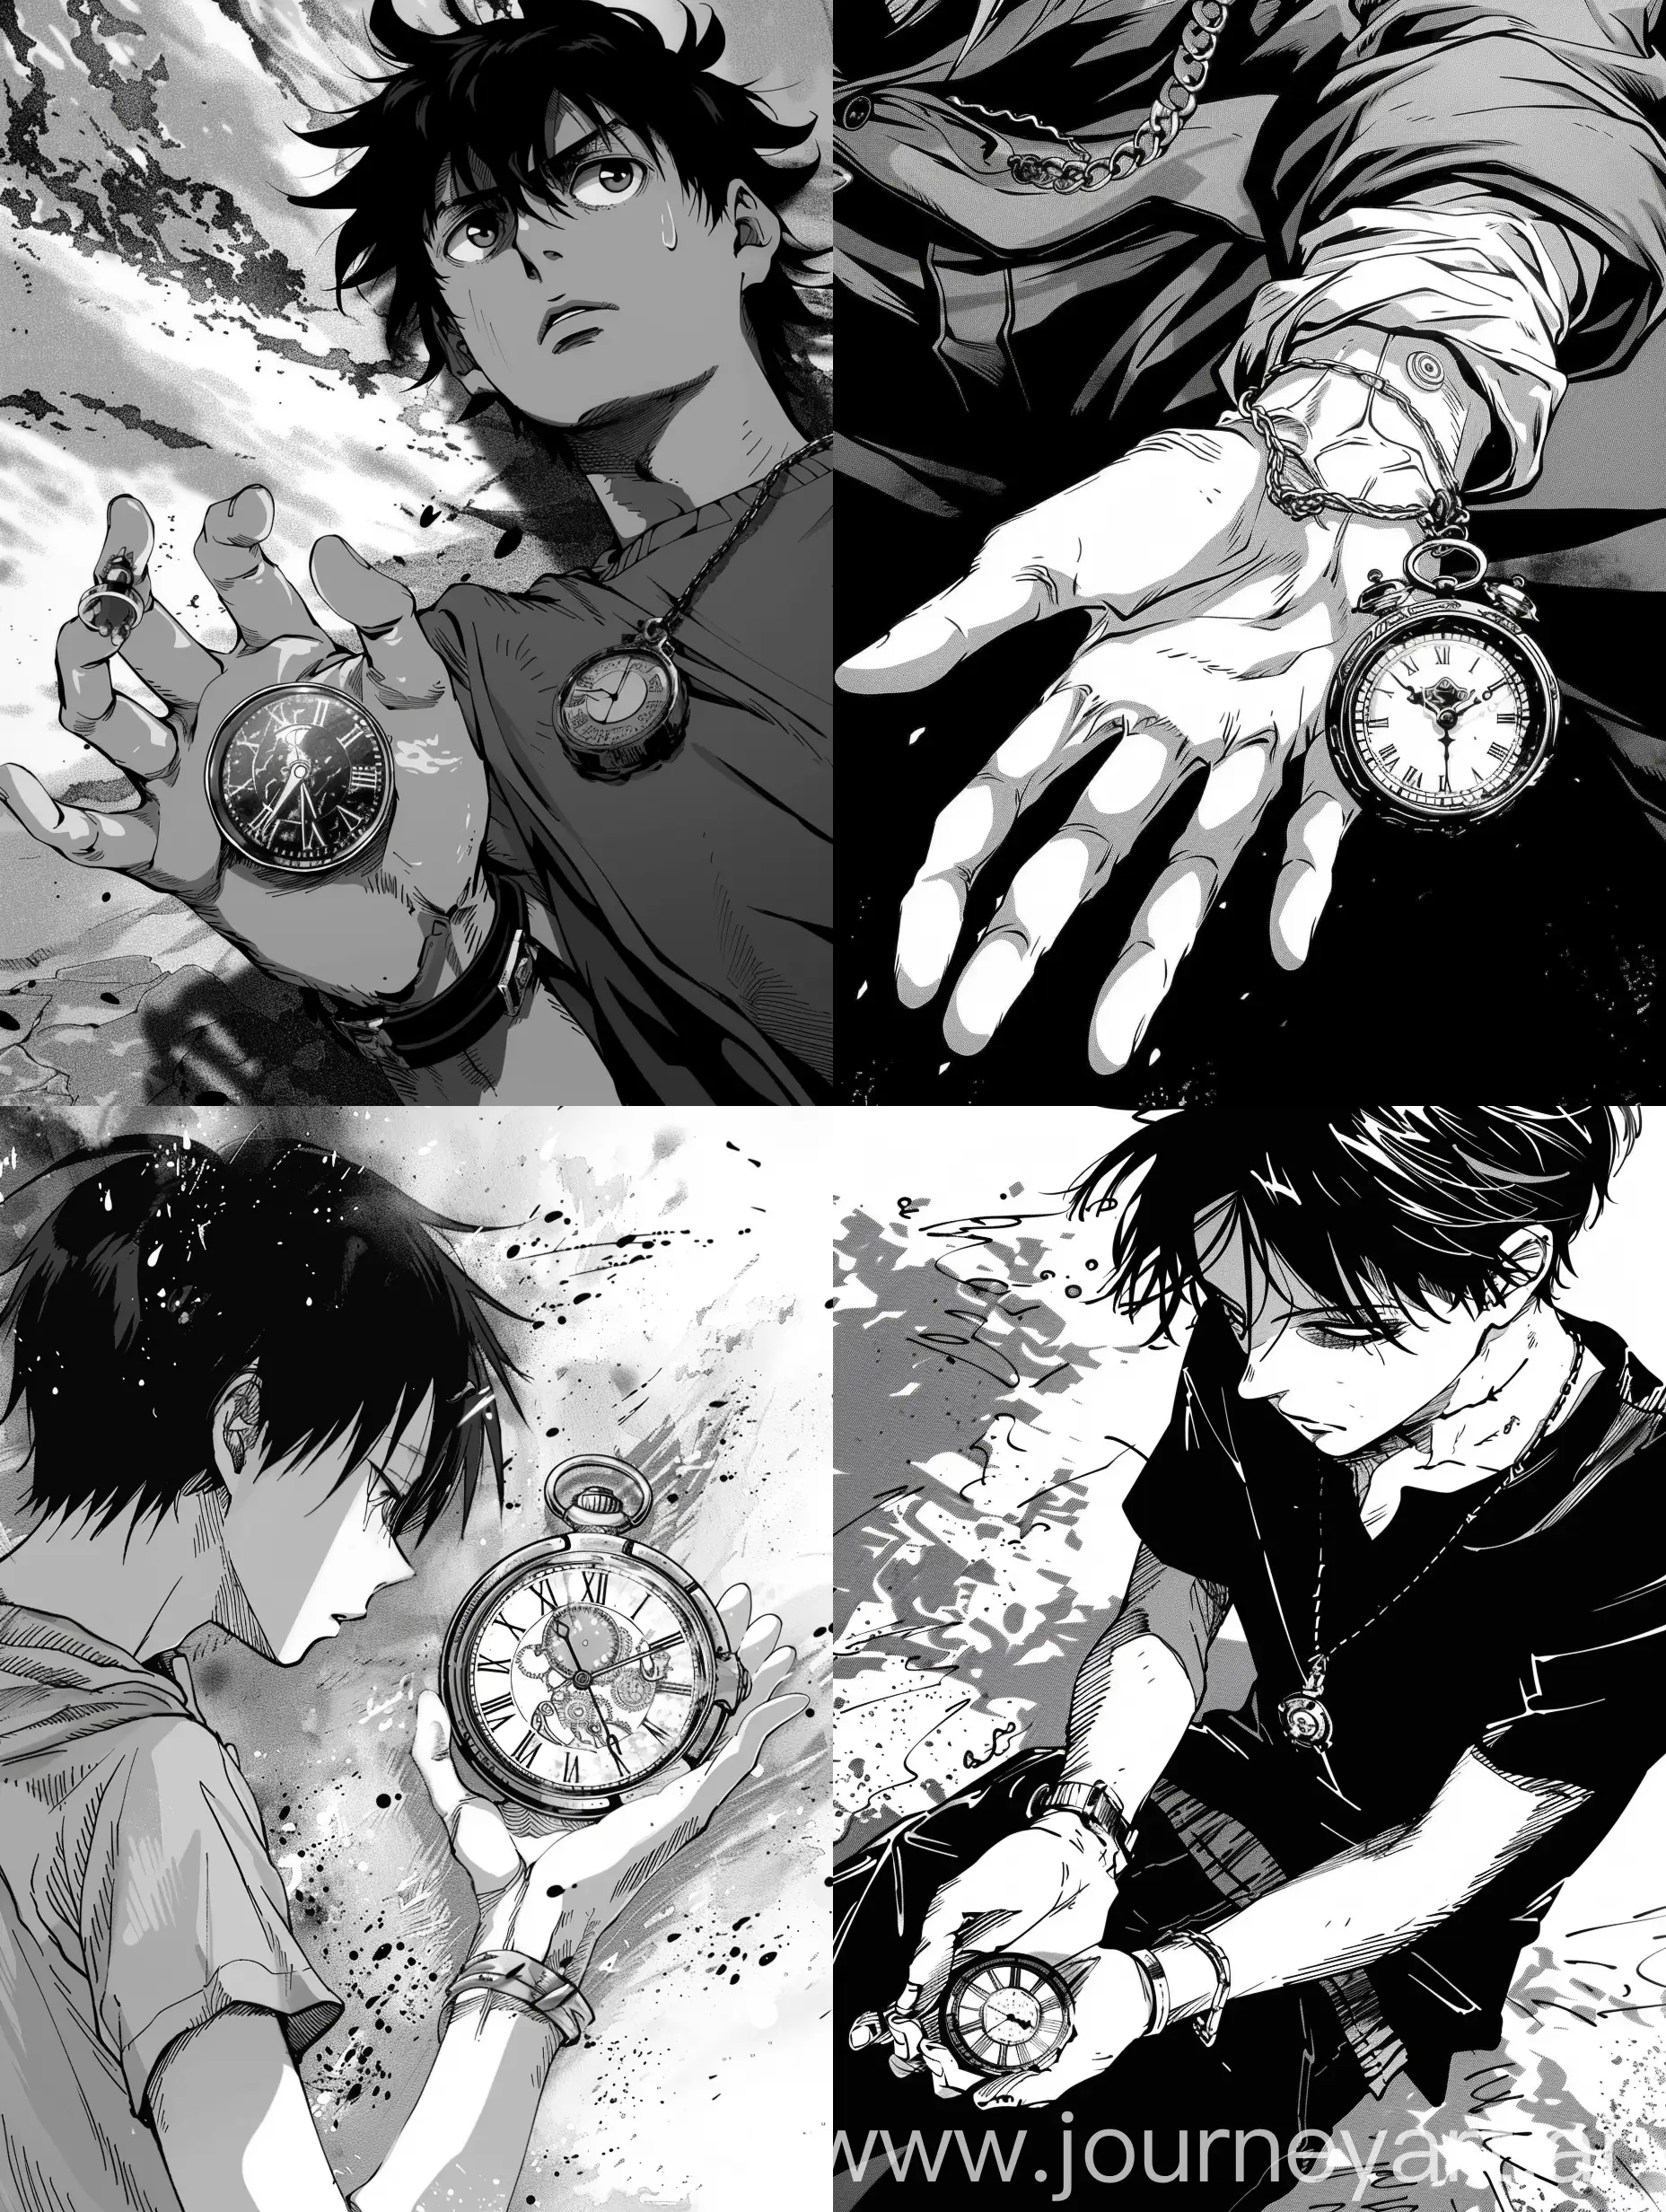 The time amulet in the guy's hand, manga style.